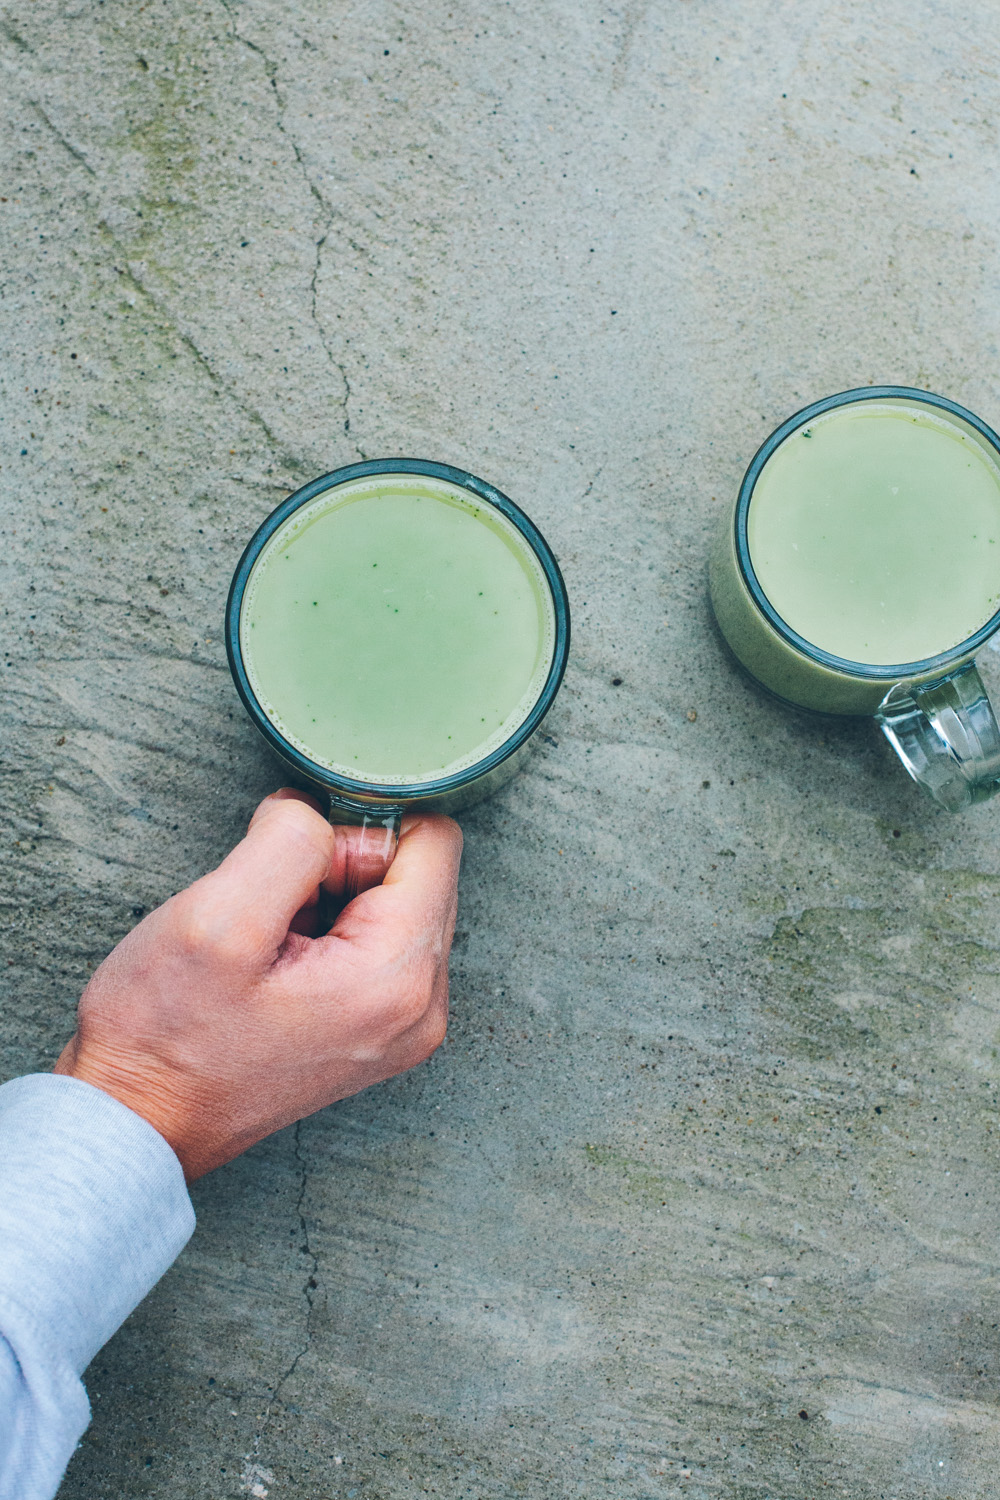 Matcha tea benefits: what they are, how to get them, where to buy it